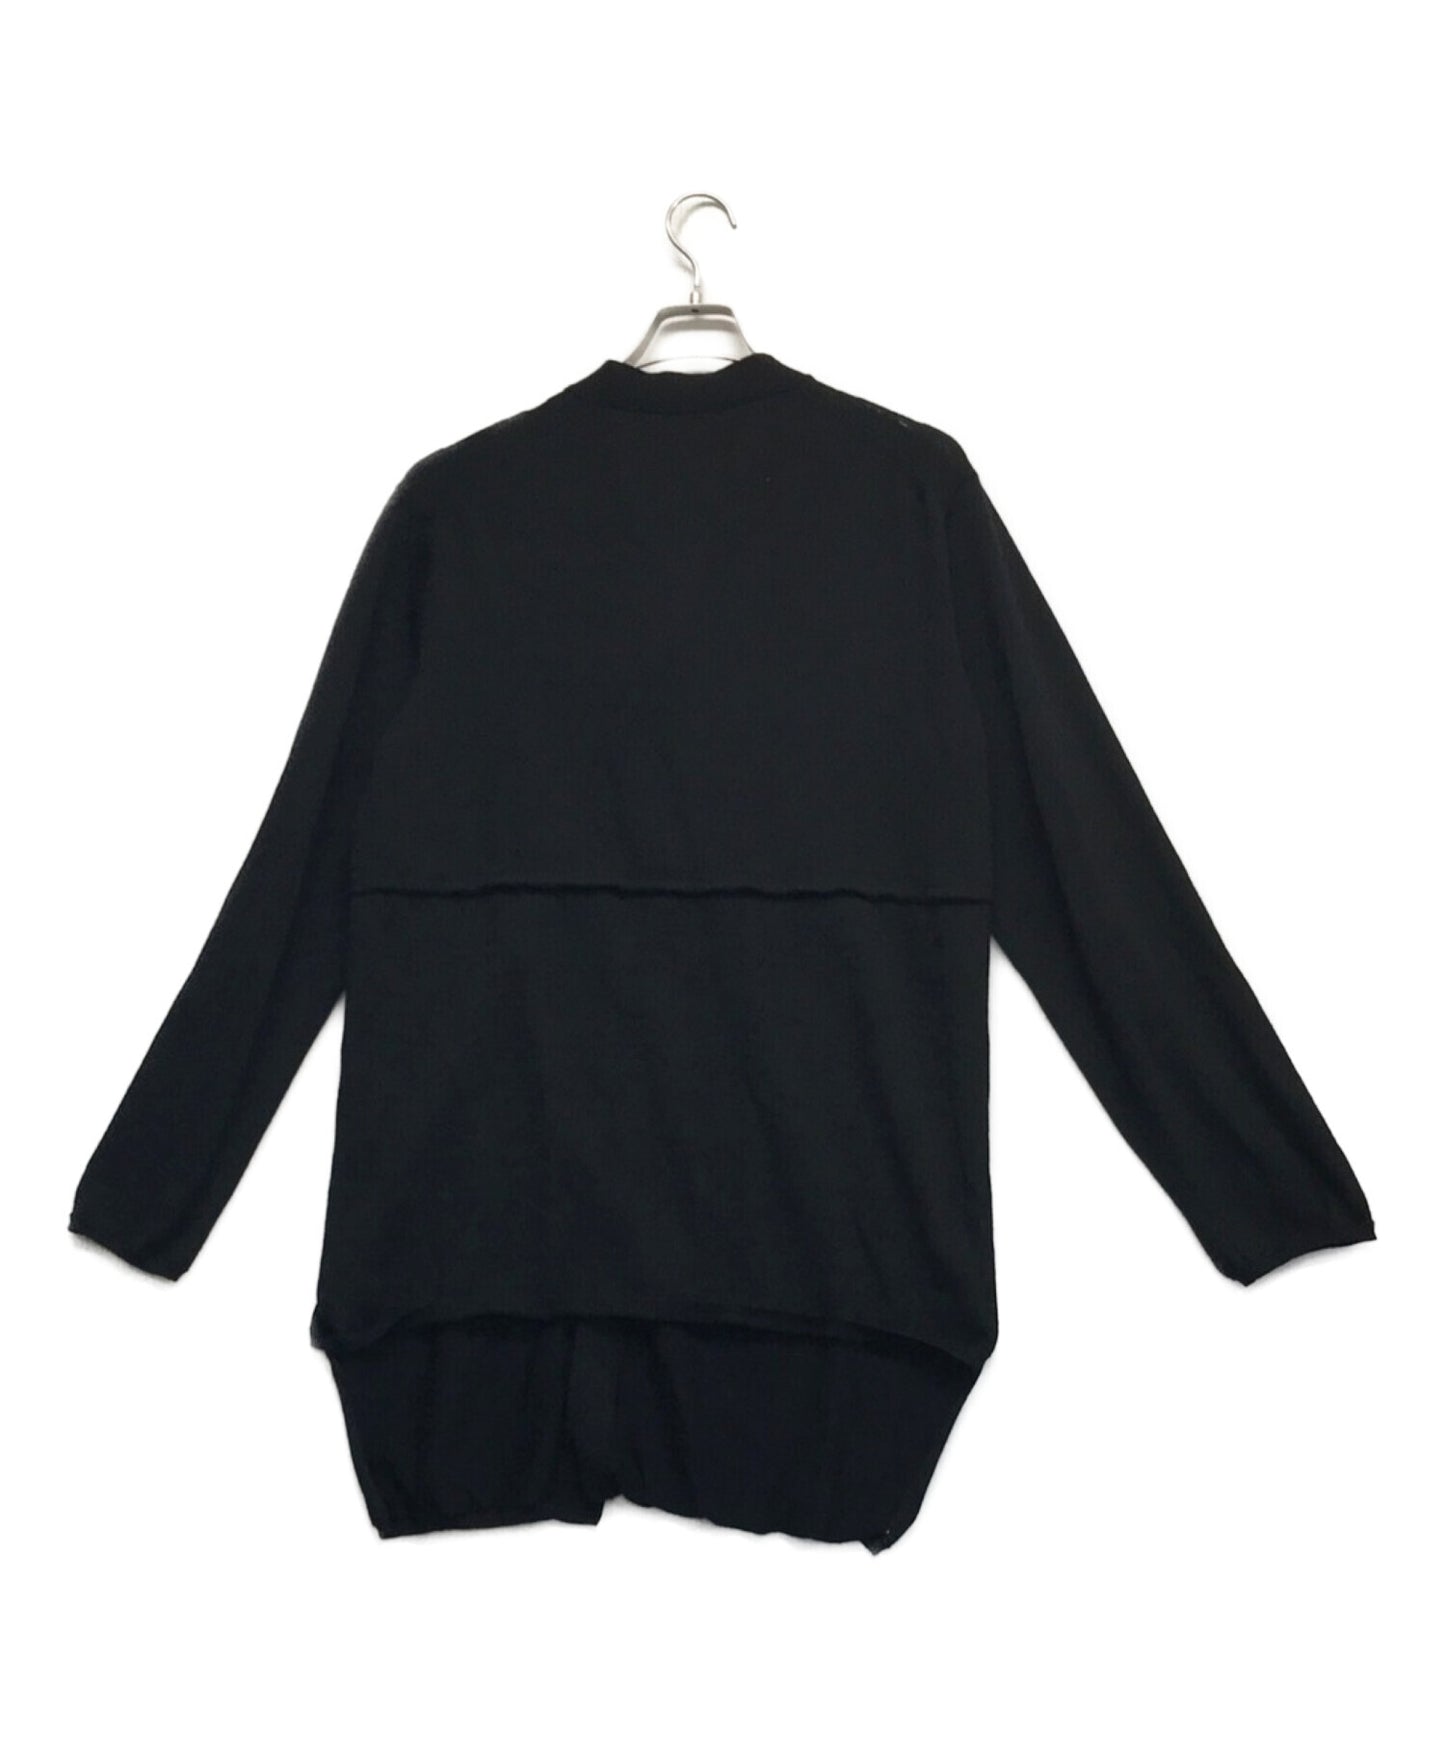 Comme des garcons homme plus cardigan cardigan twisted pf-n019